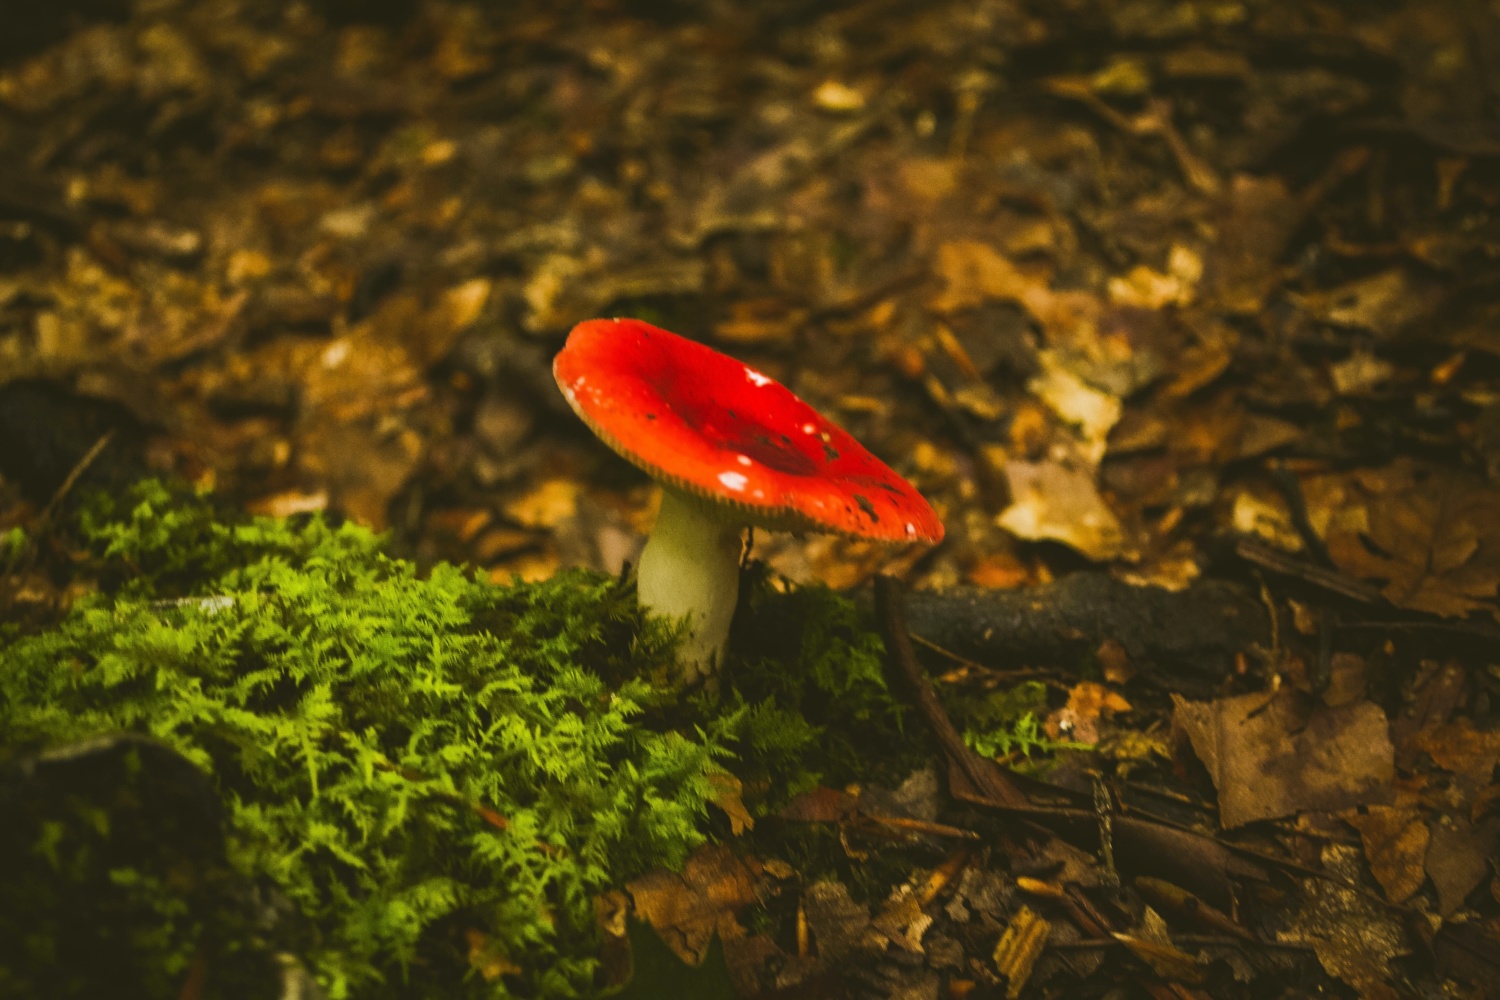 Fairytale toadstool in forest